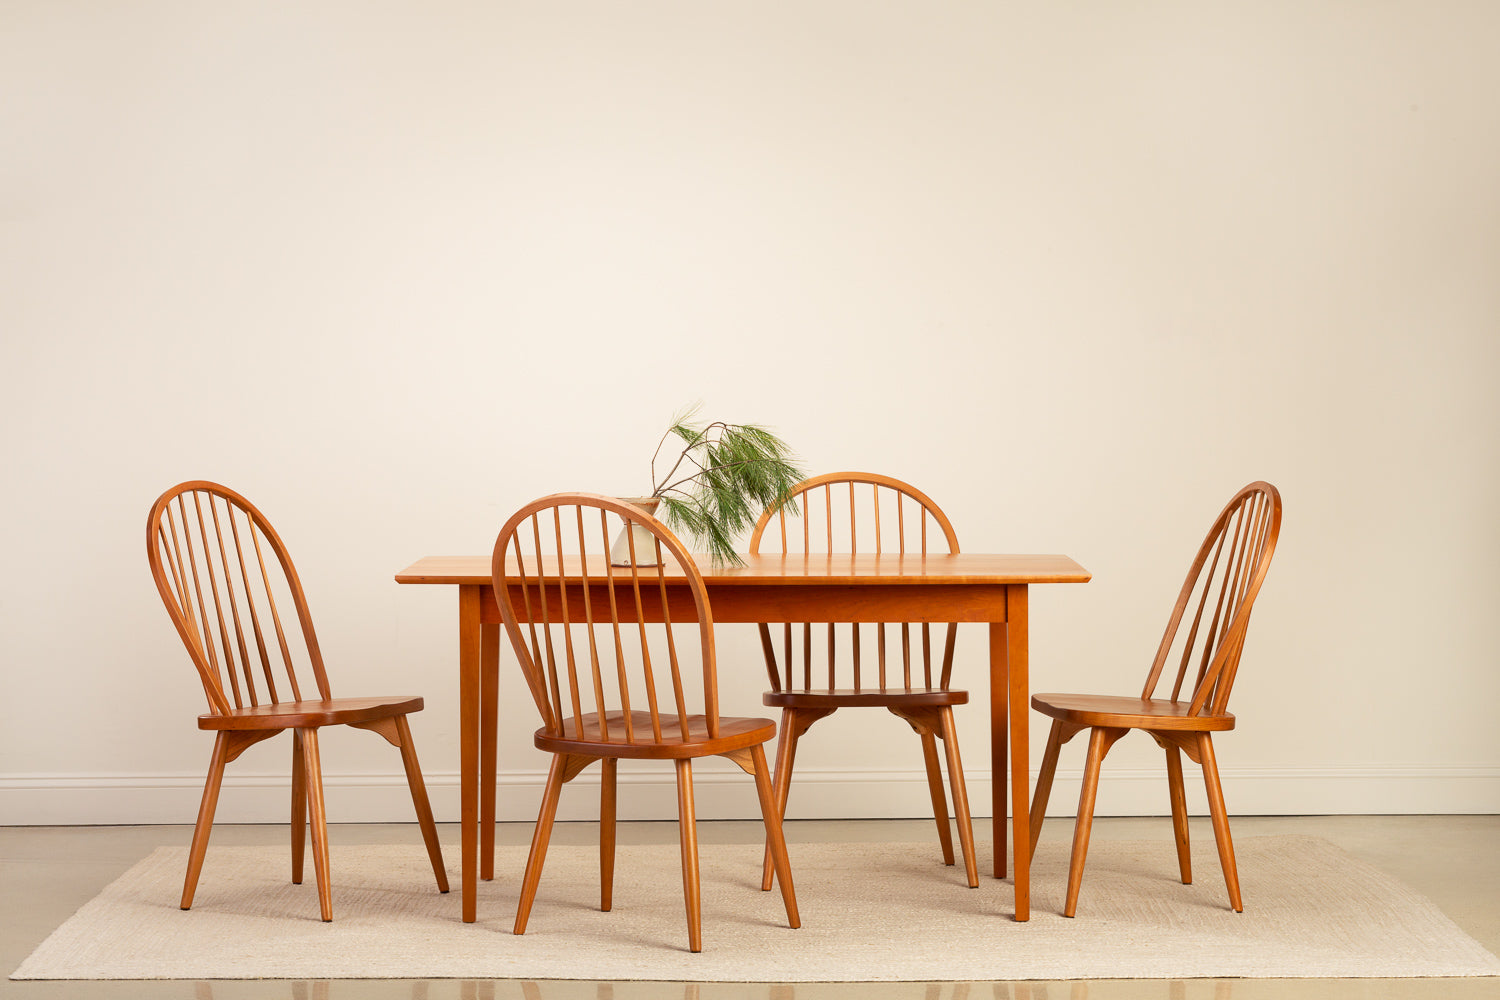 Chilton Furniture's Bass Harbor Dining Table paired with four Farmington Chairs in cherry wood